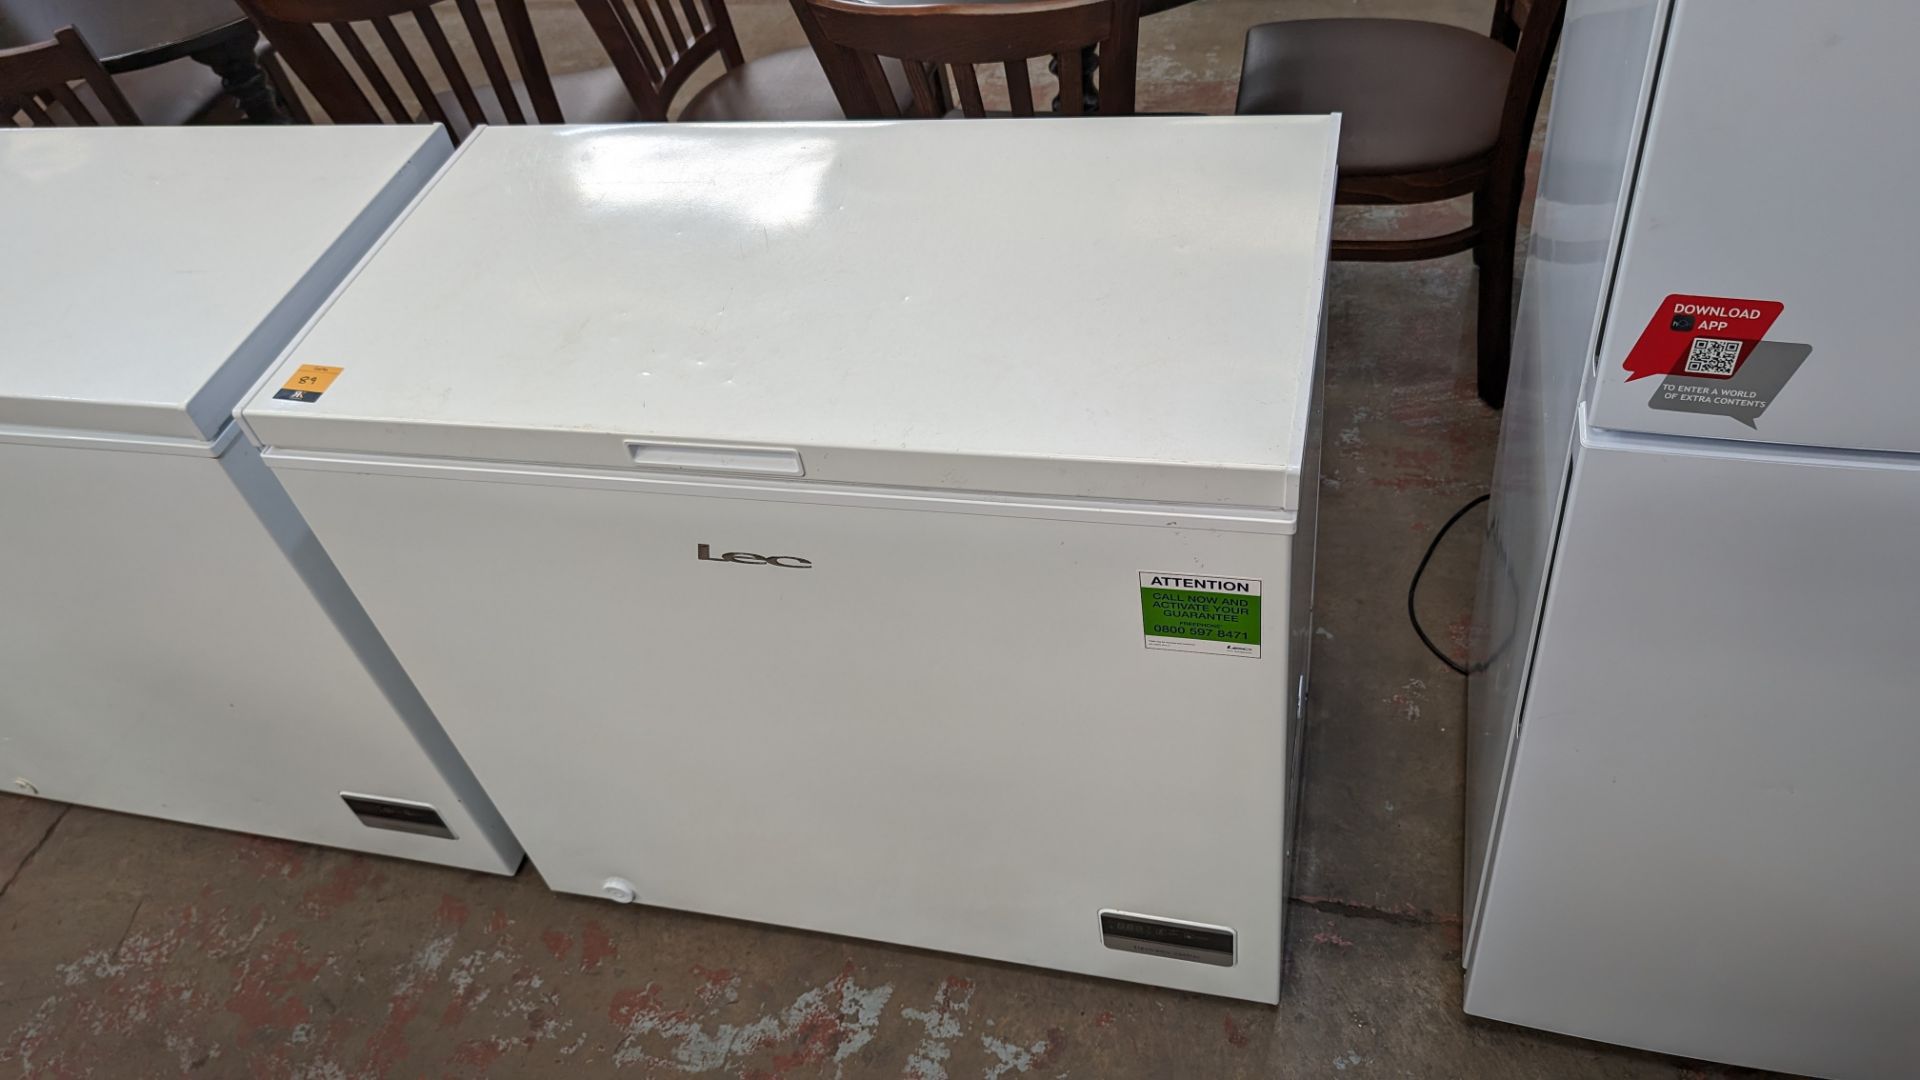 LEC electronic control chest freezer, measuring approximately 950mm long - Image 2 of 5